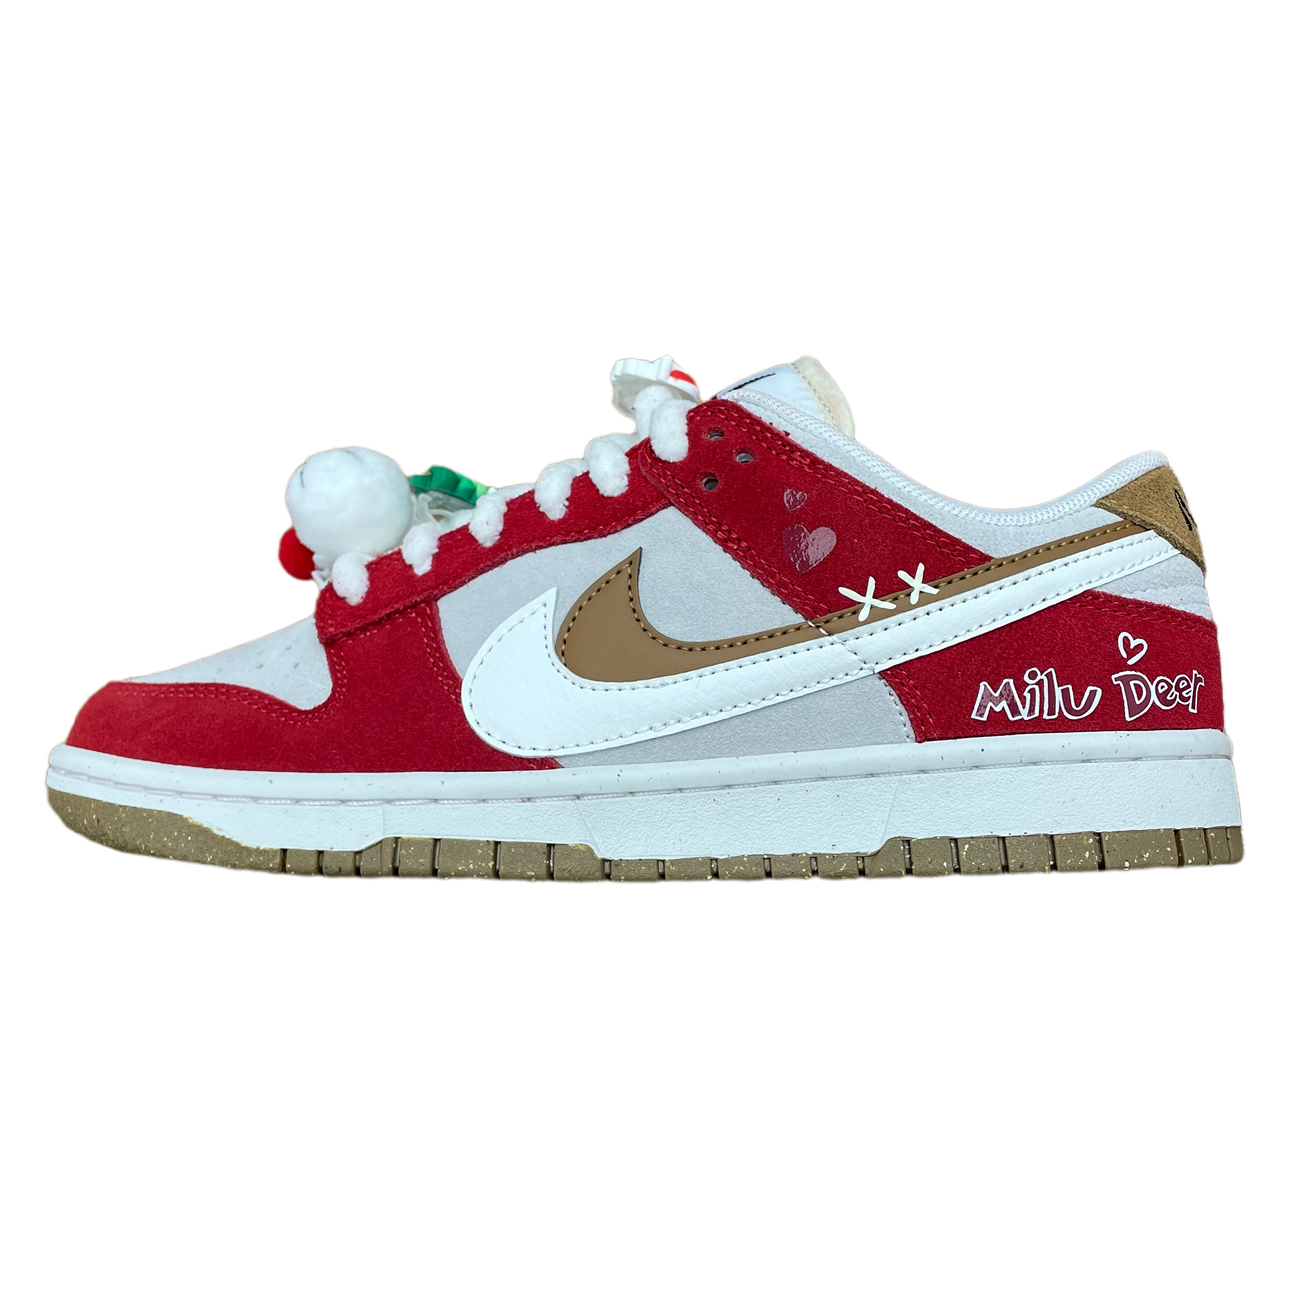 Nike Sb Dunk Low 85 Christmas Red White Brown Do9457 112 (1) - newkick.org